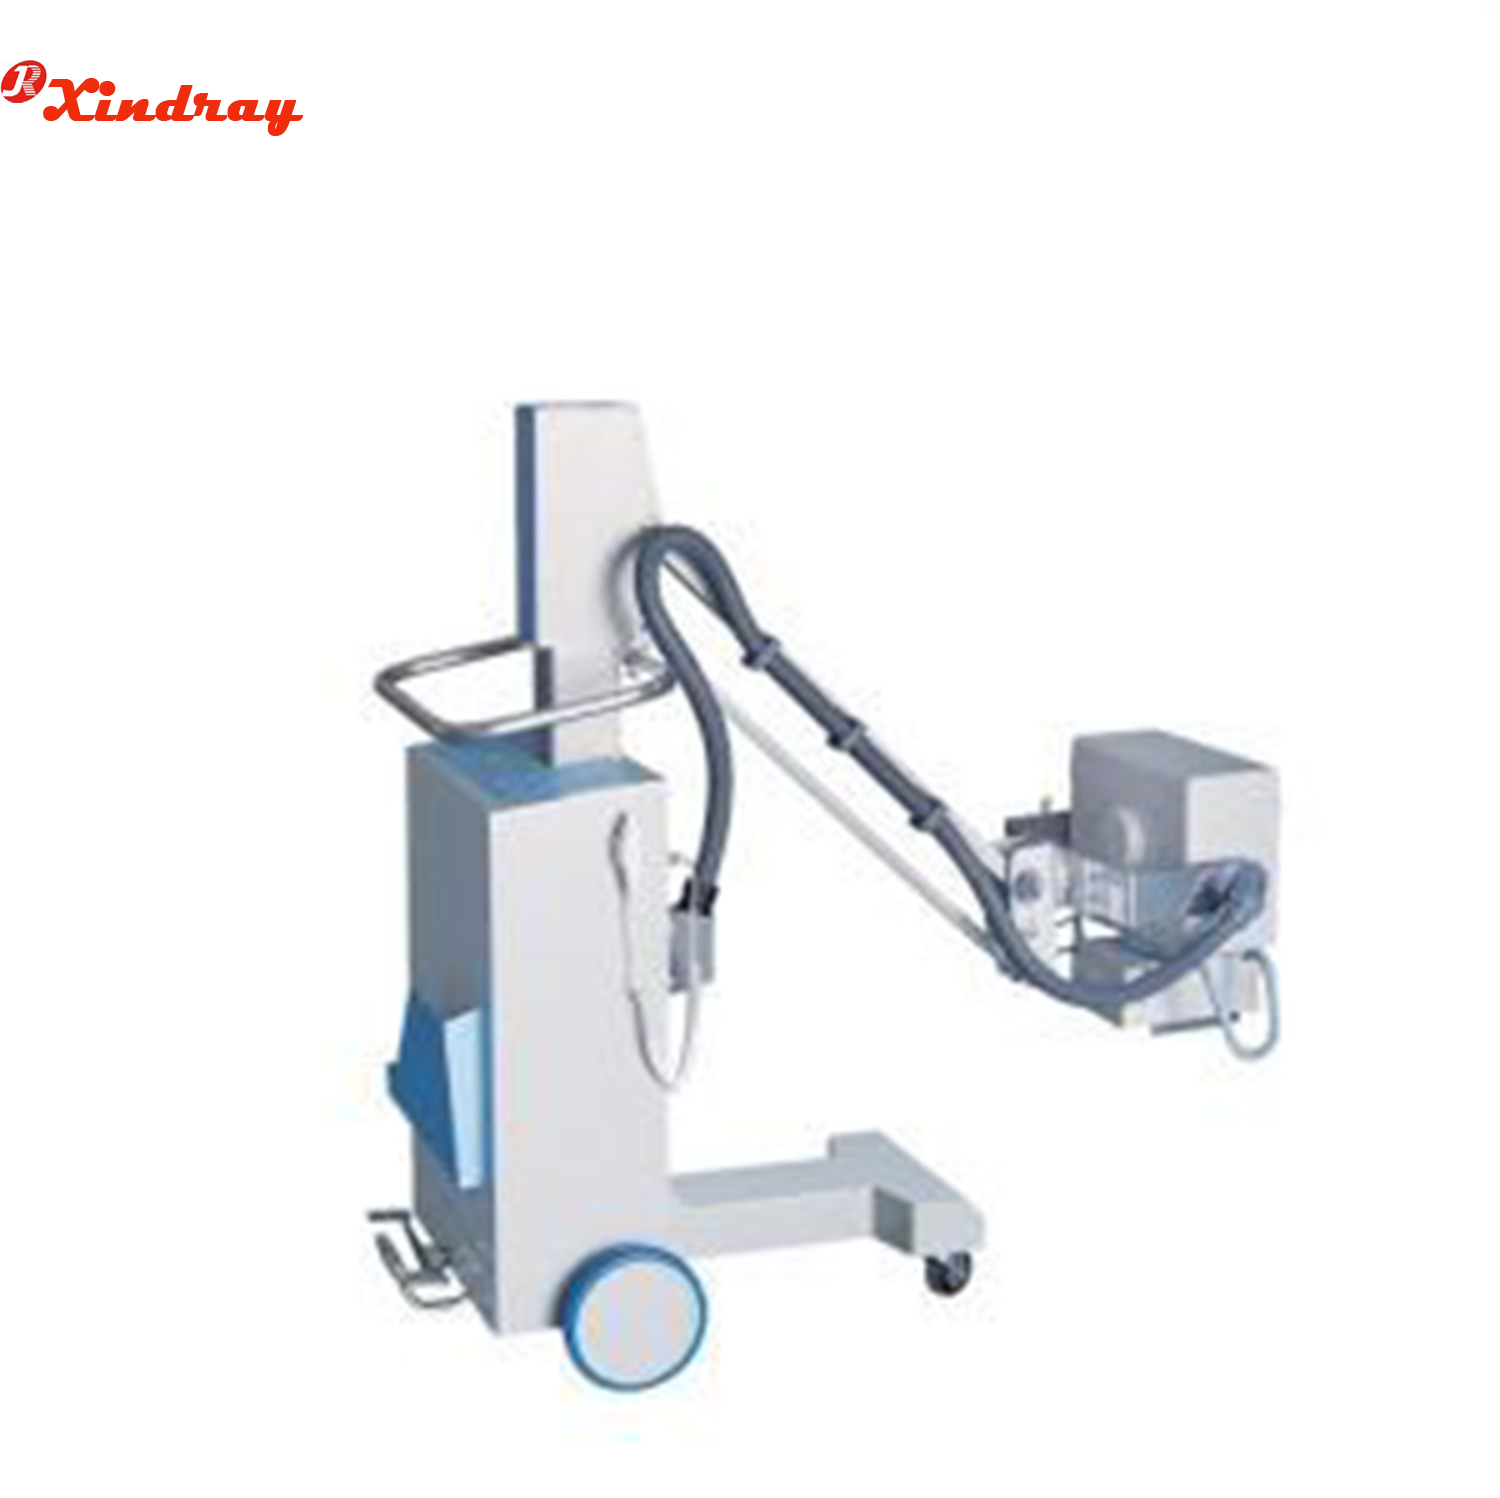 Hight Quality Mobile X-ray Equipment